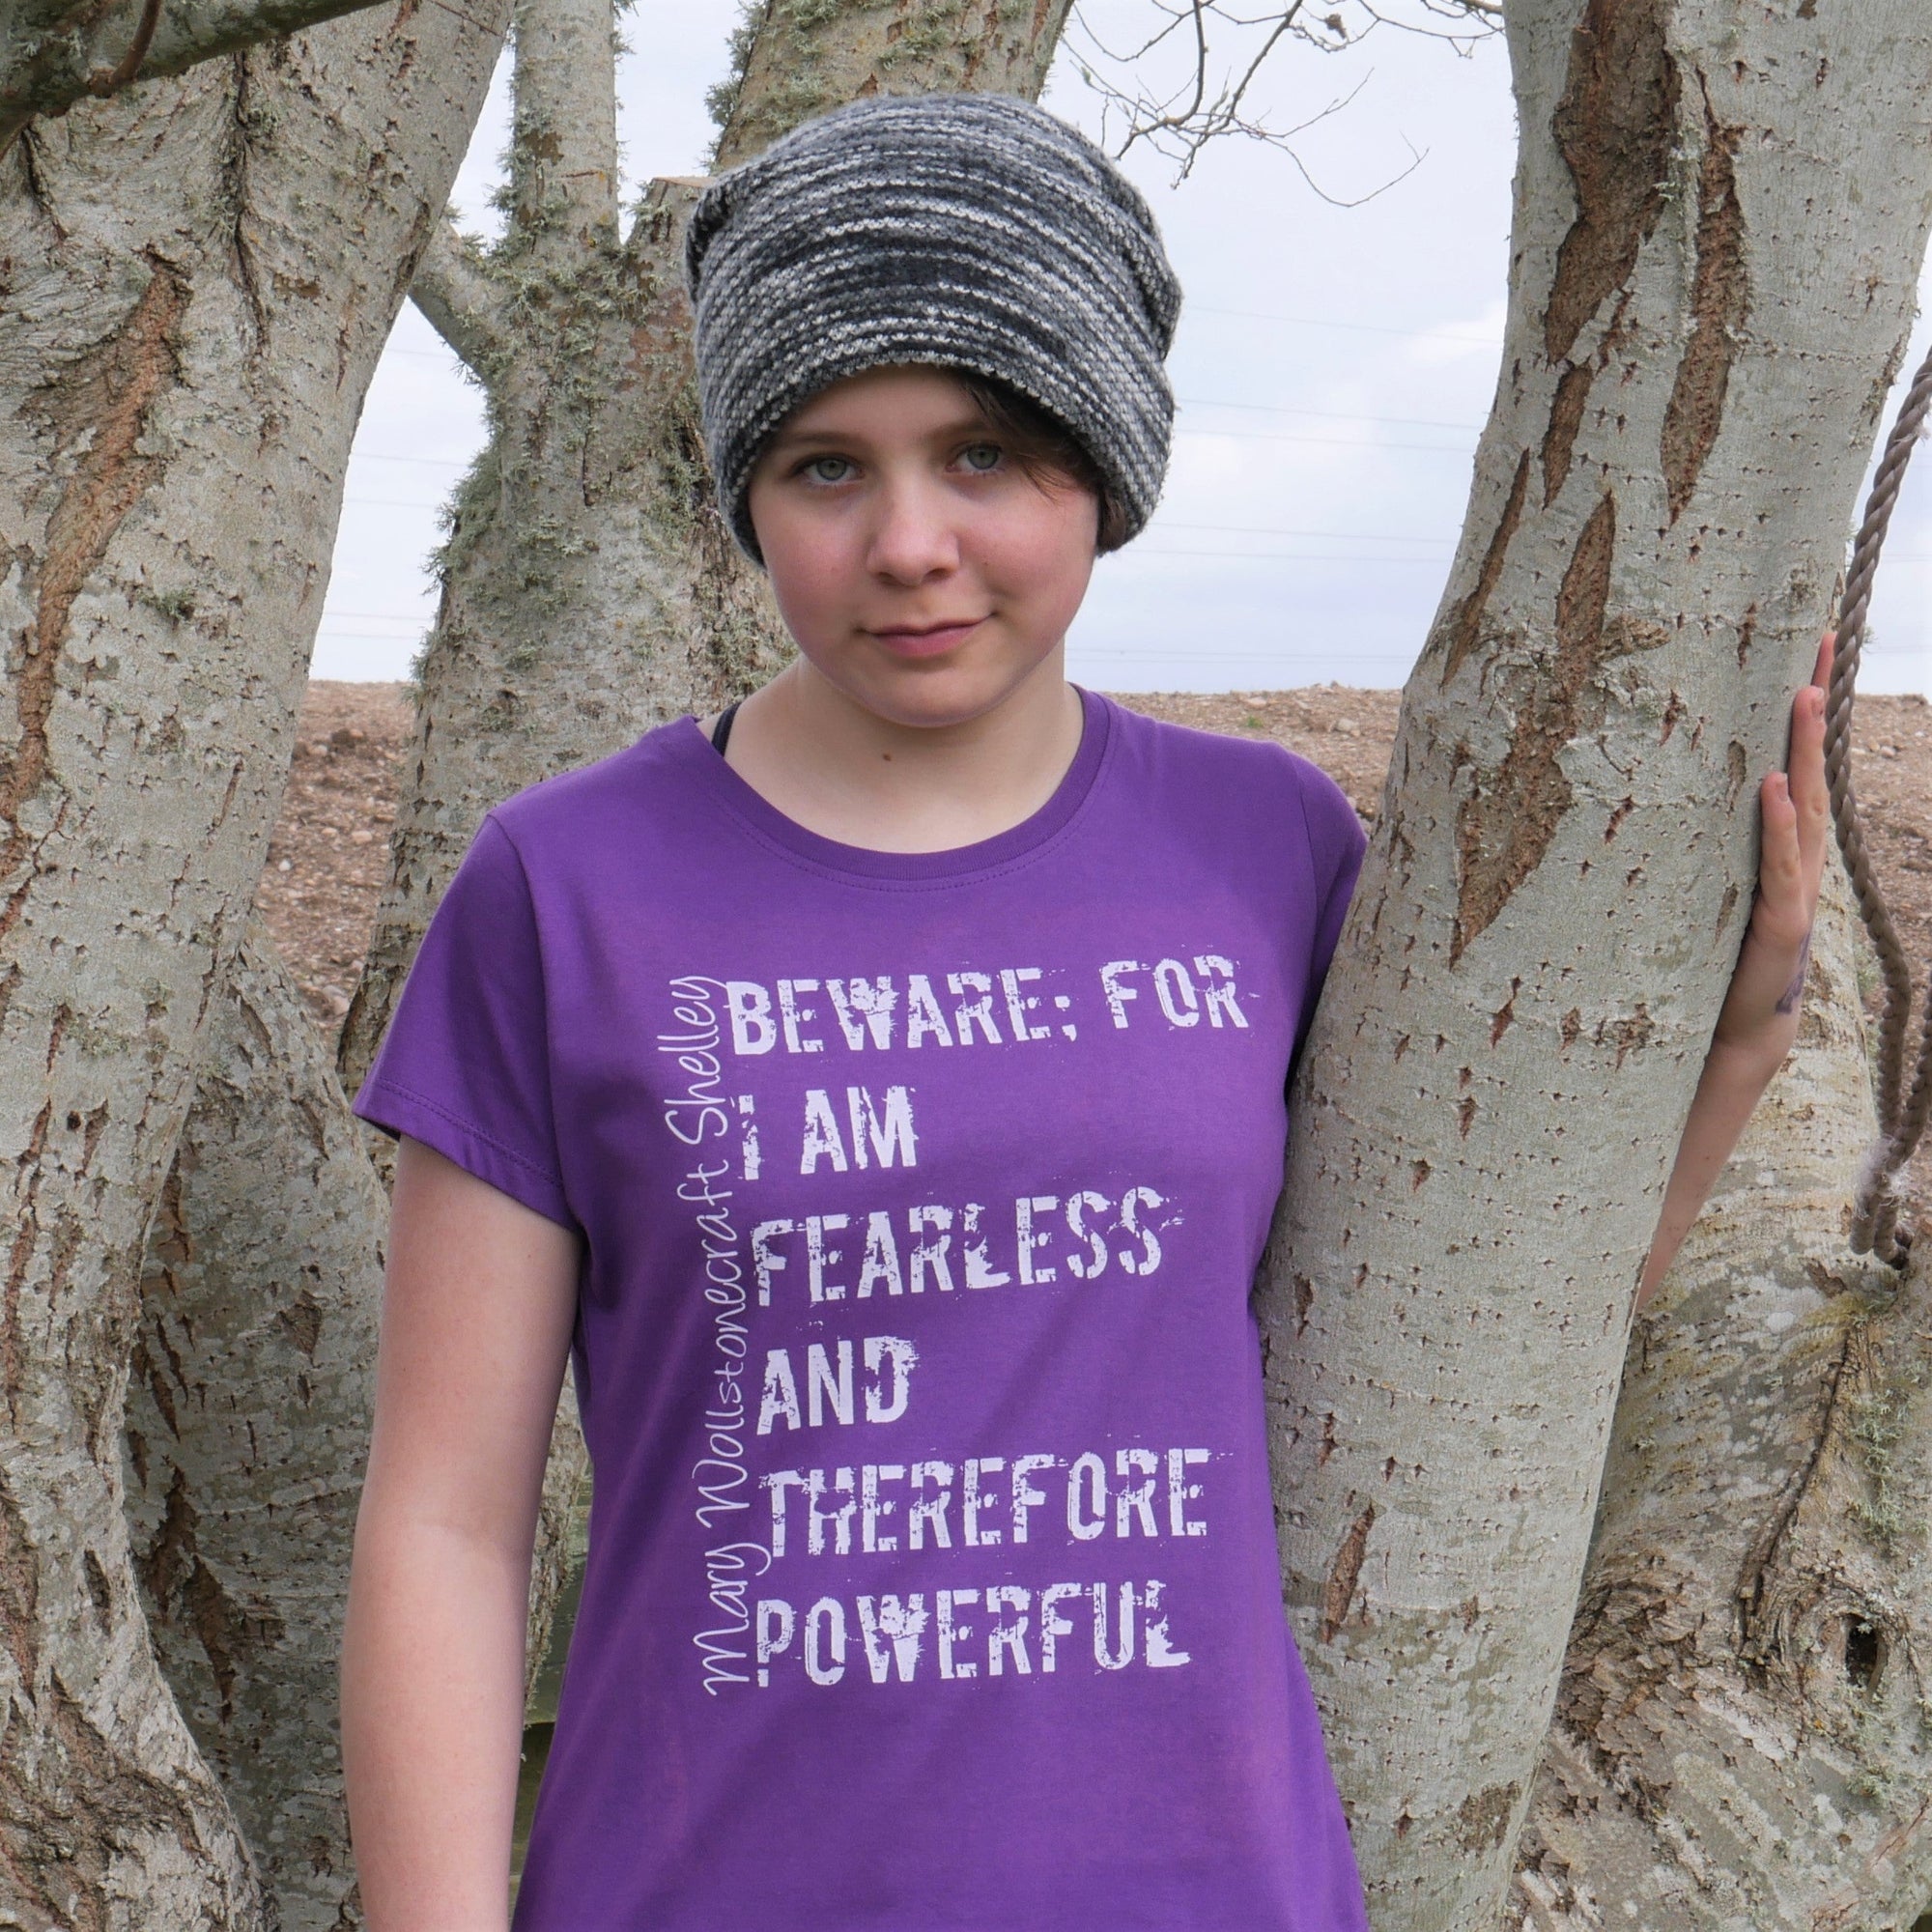 Beware For I am Fearless and Therefore Powerful - T-Shirt for Teens/Adults - Scarf Monkey